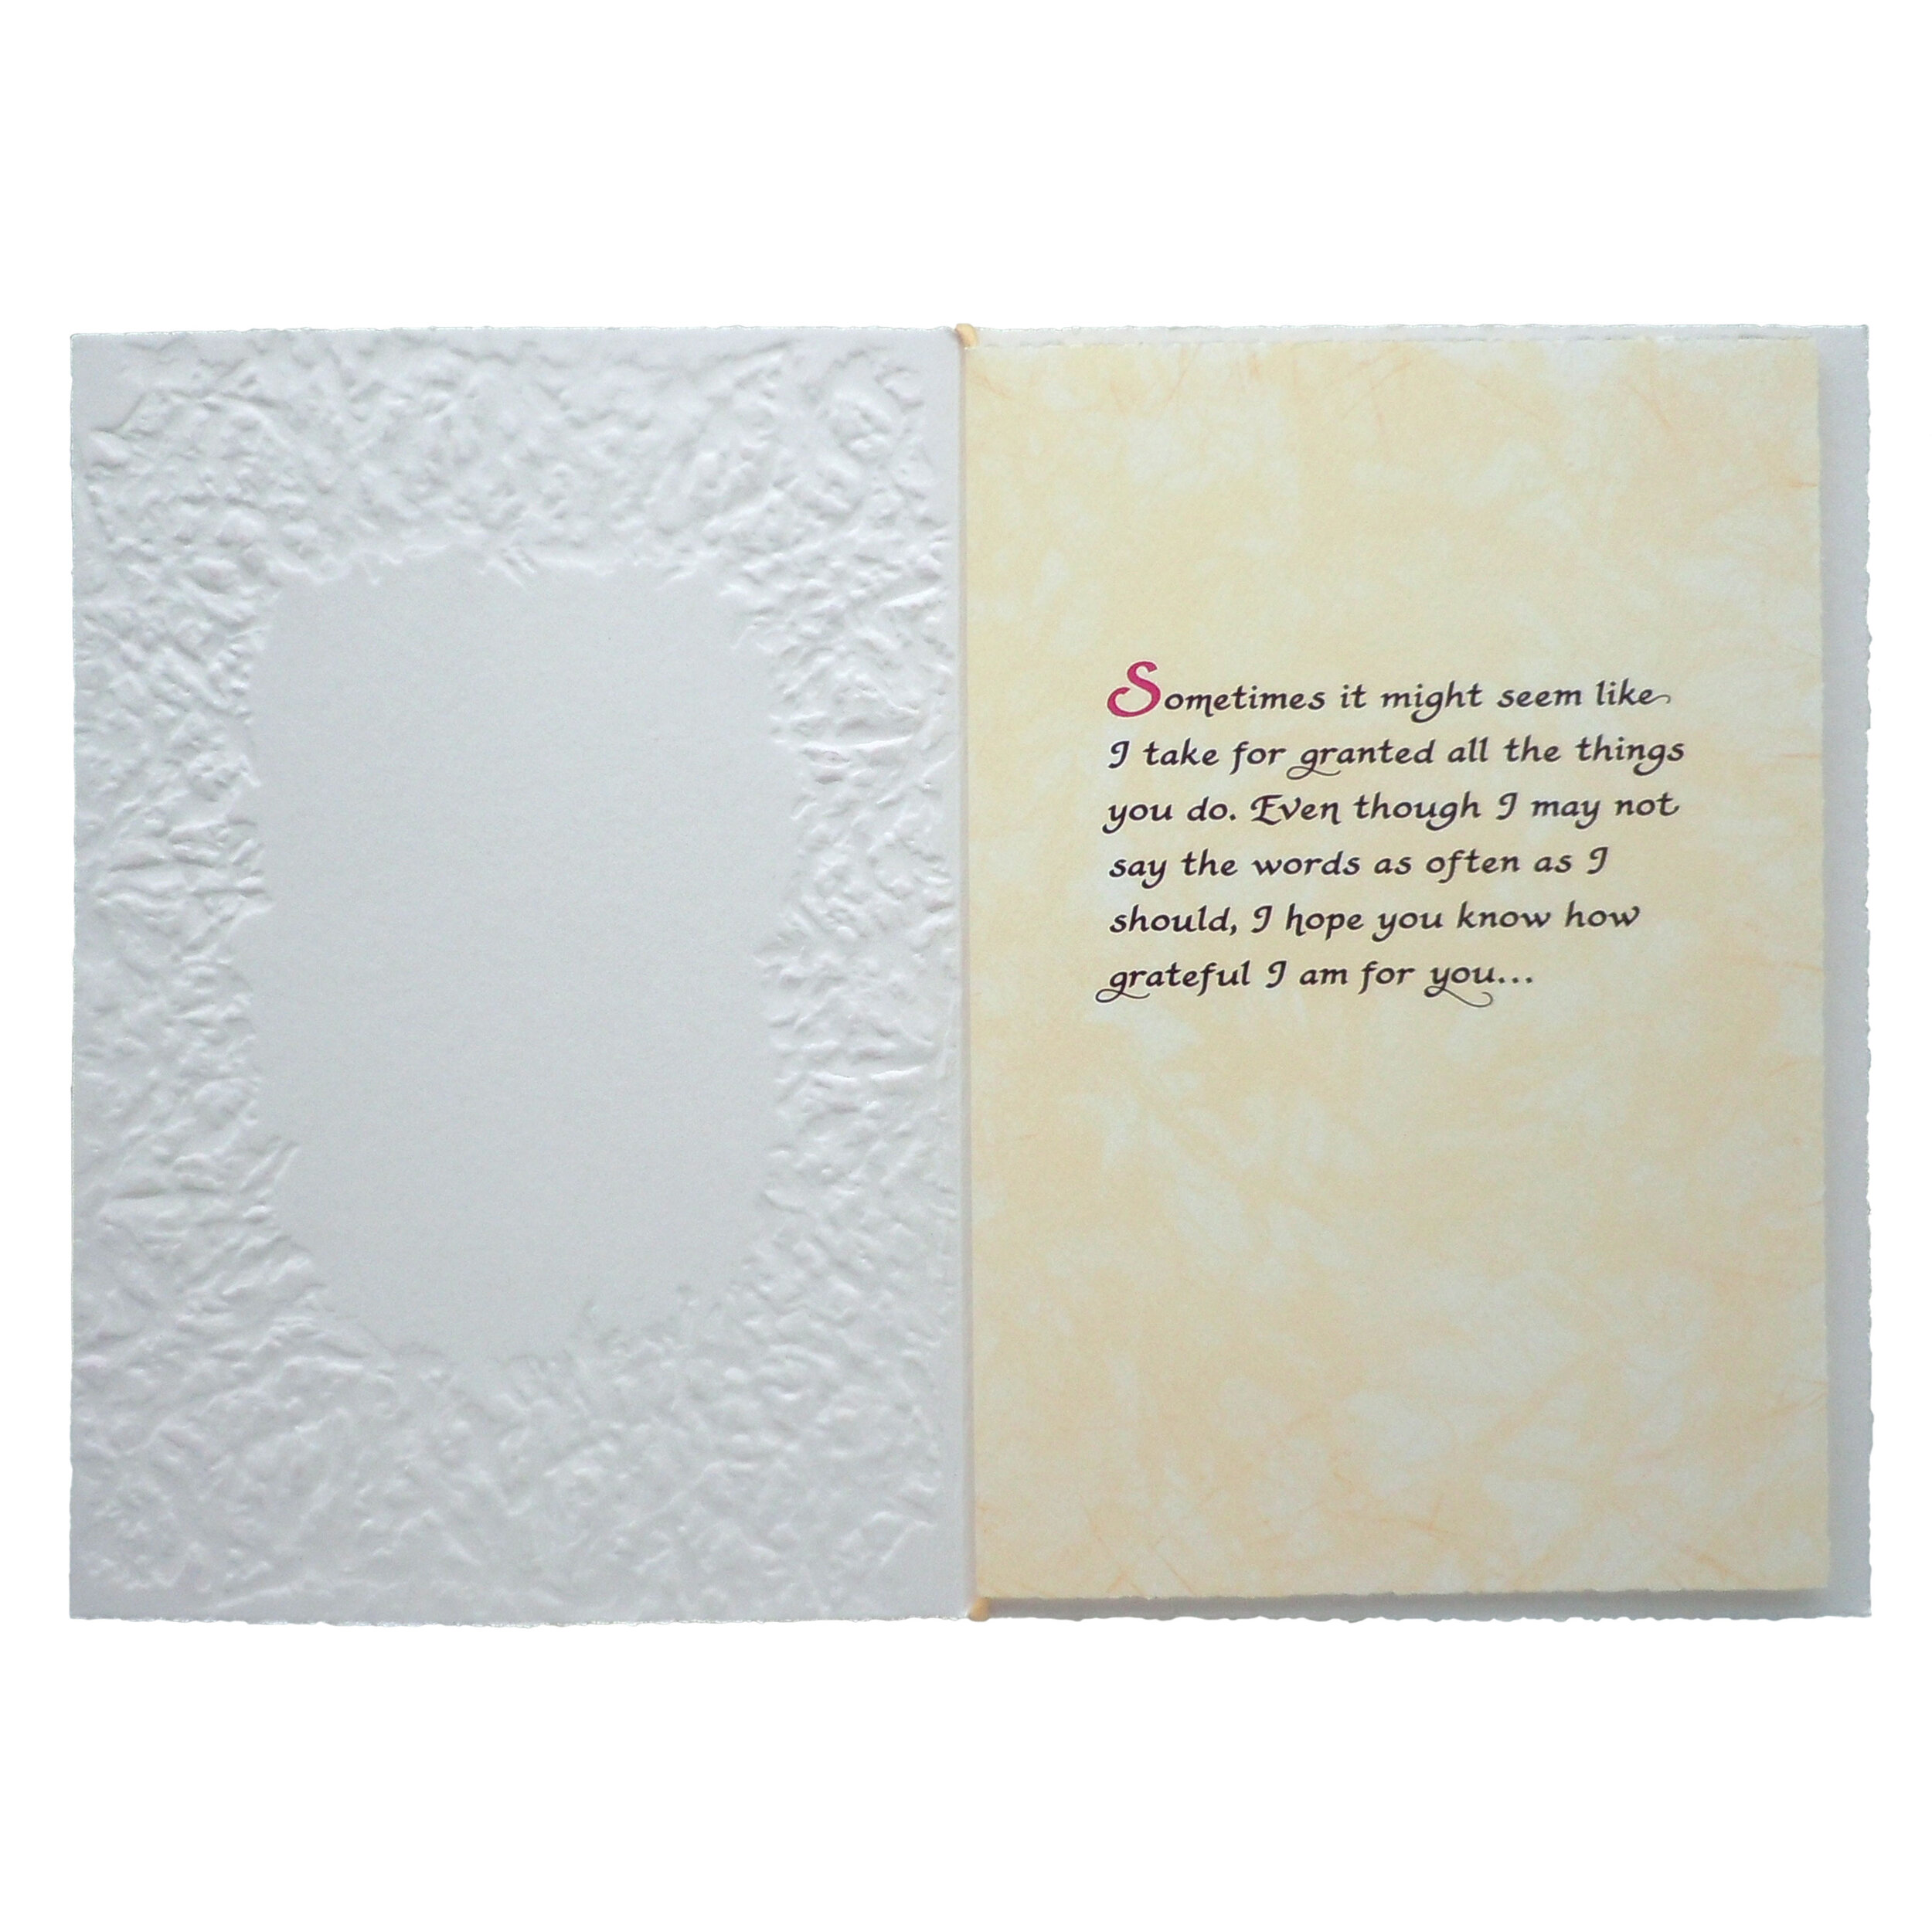 OK for Strained Relationship  c19 With Love to my Wife Details about   MOTHERS DAY CARD 